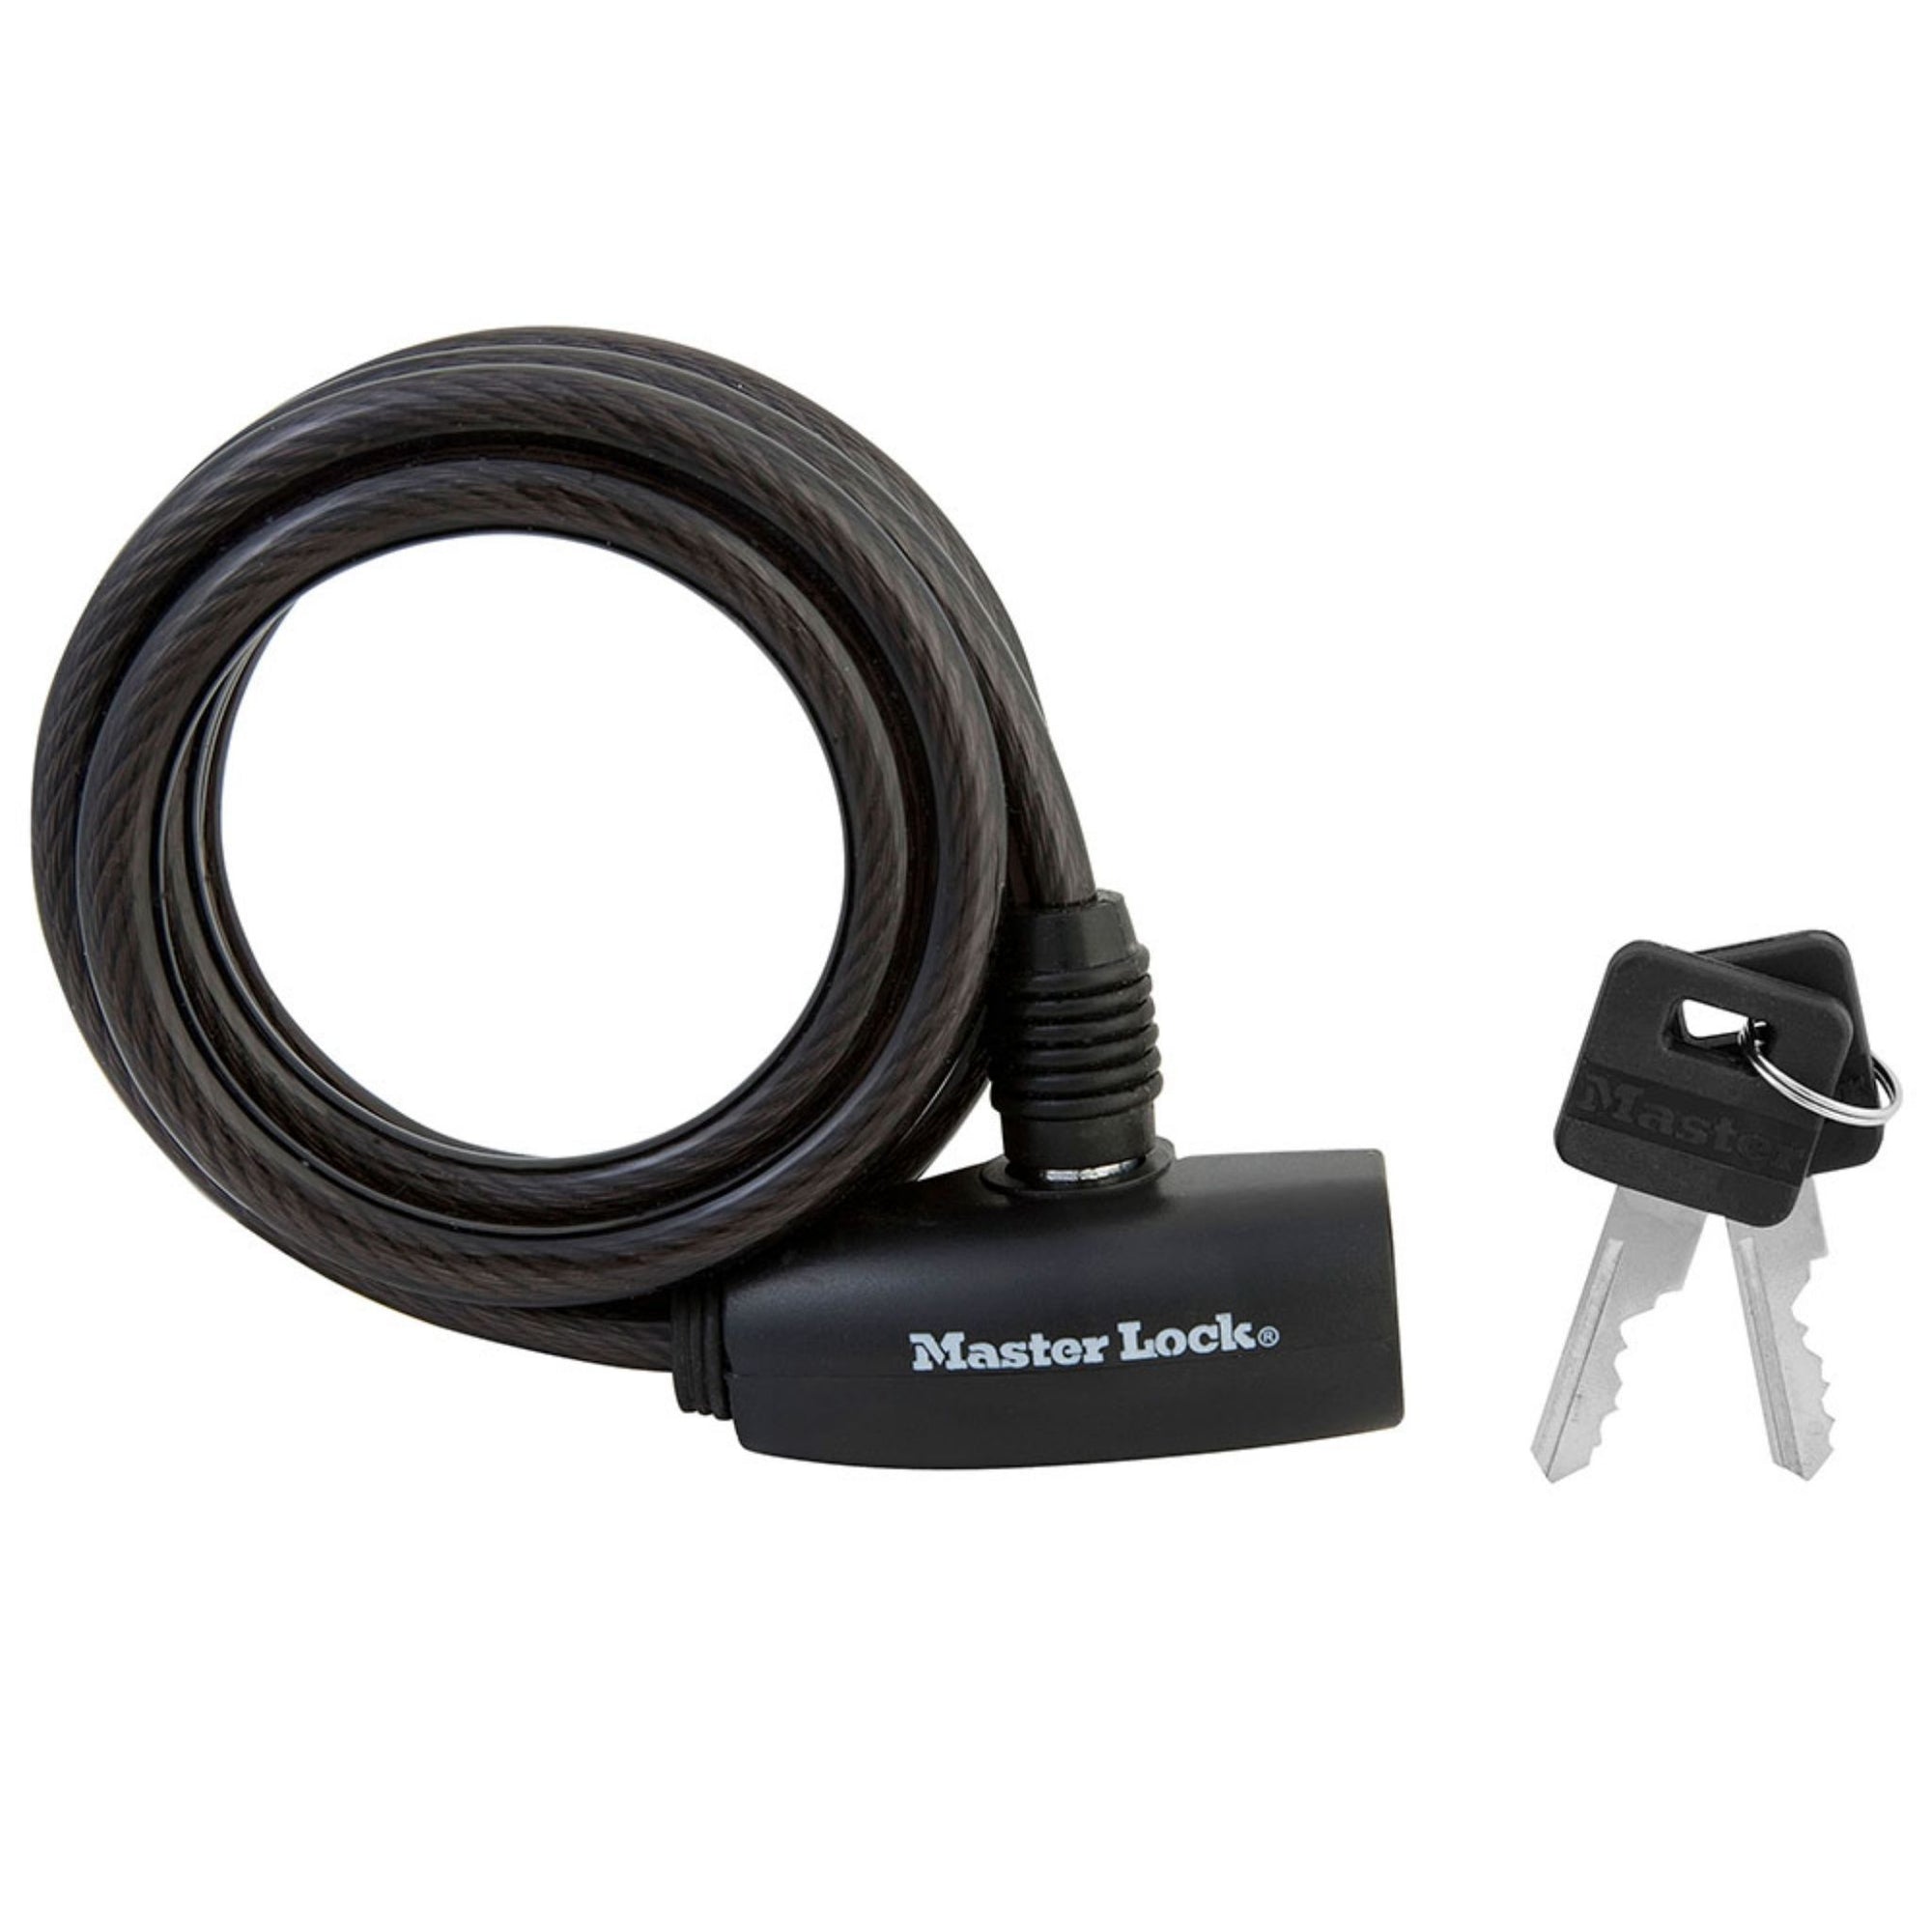 Master Lock No. 8126D Integrated Keyed Cable Lock - The Lock Source